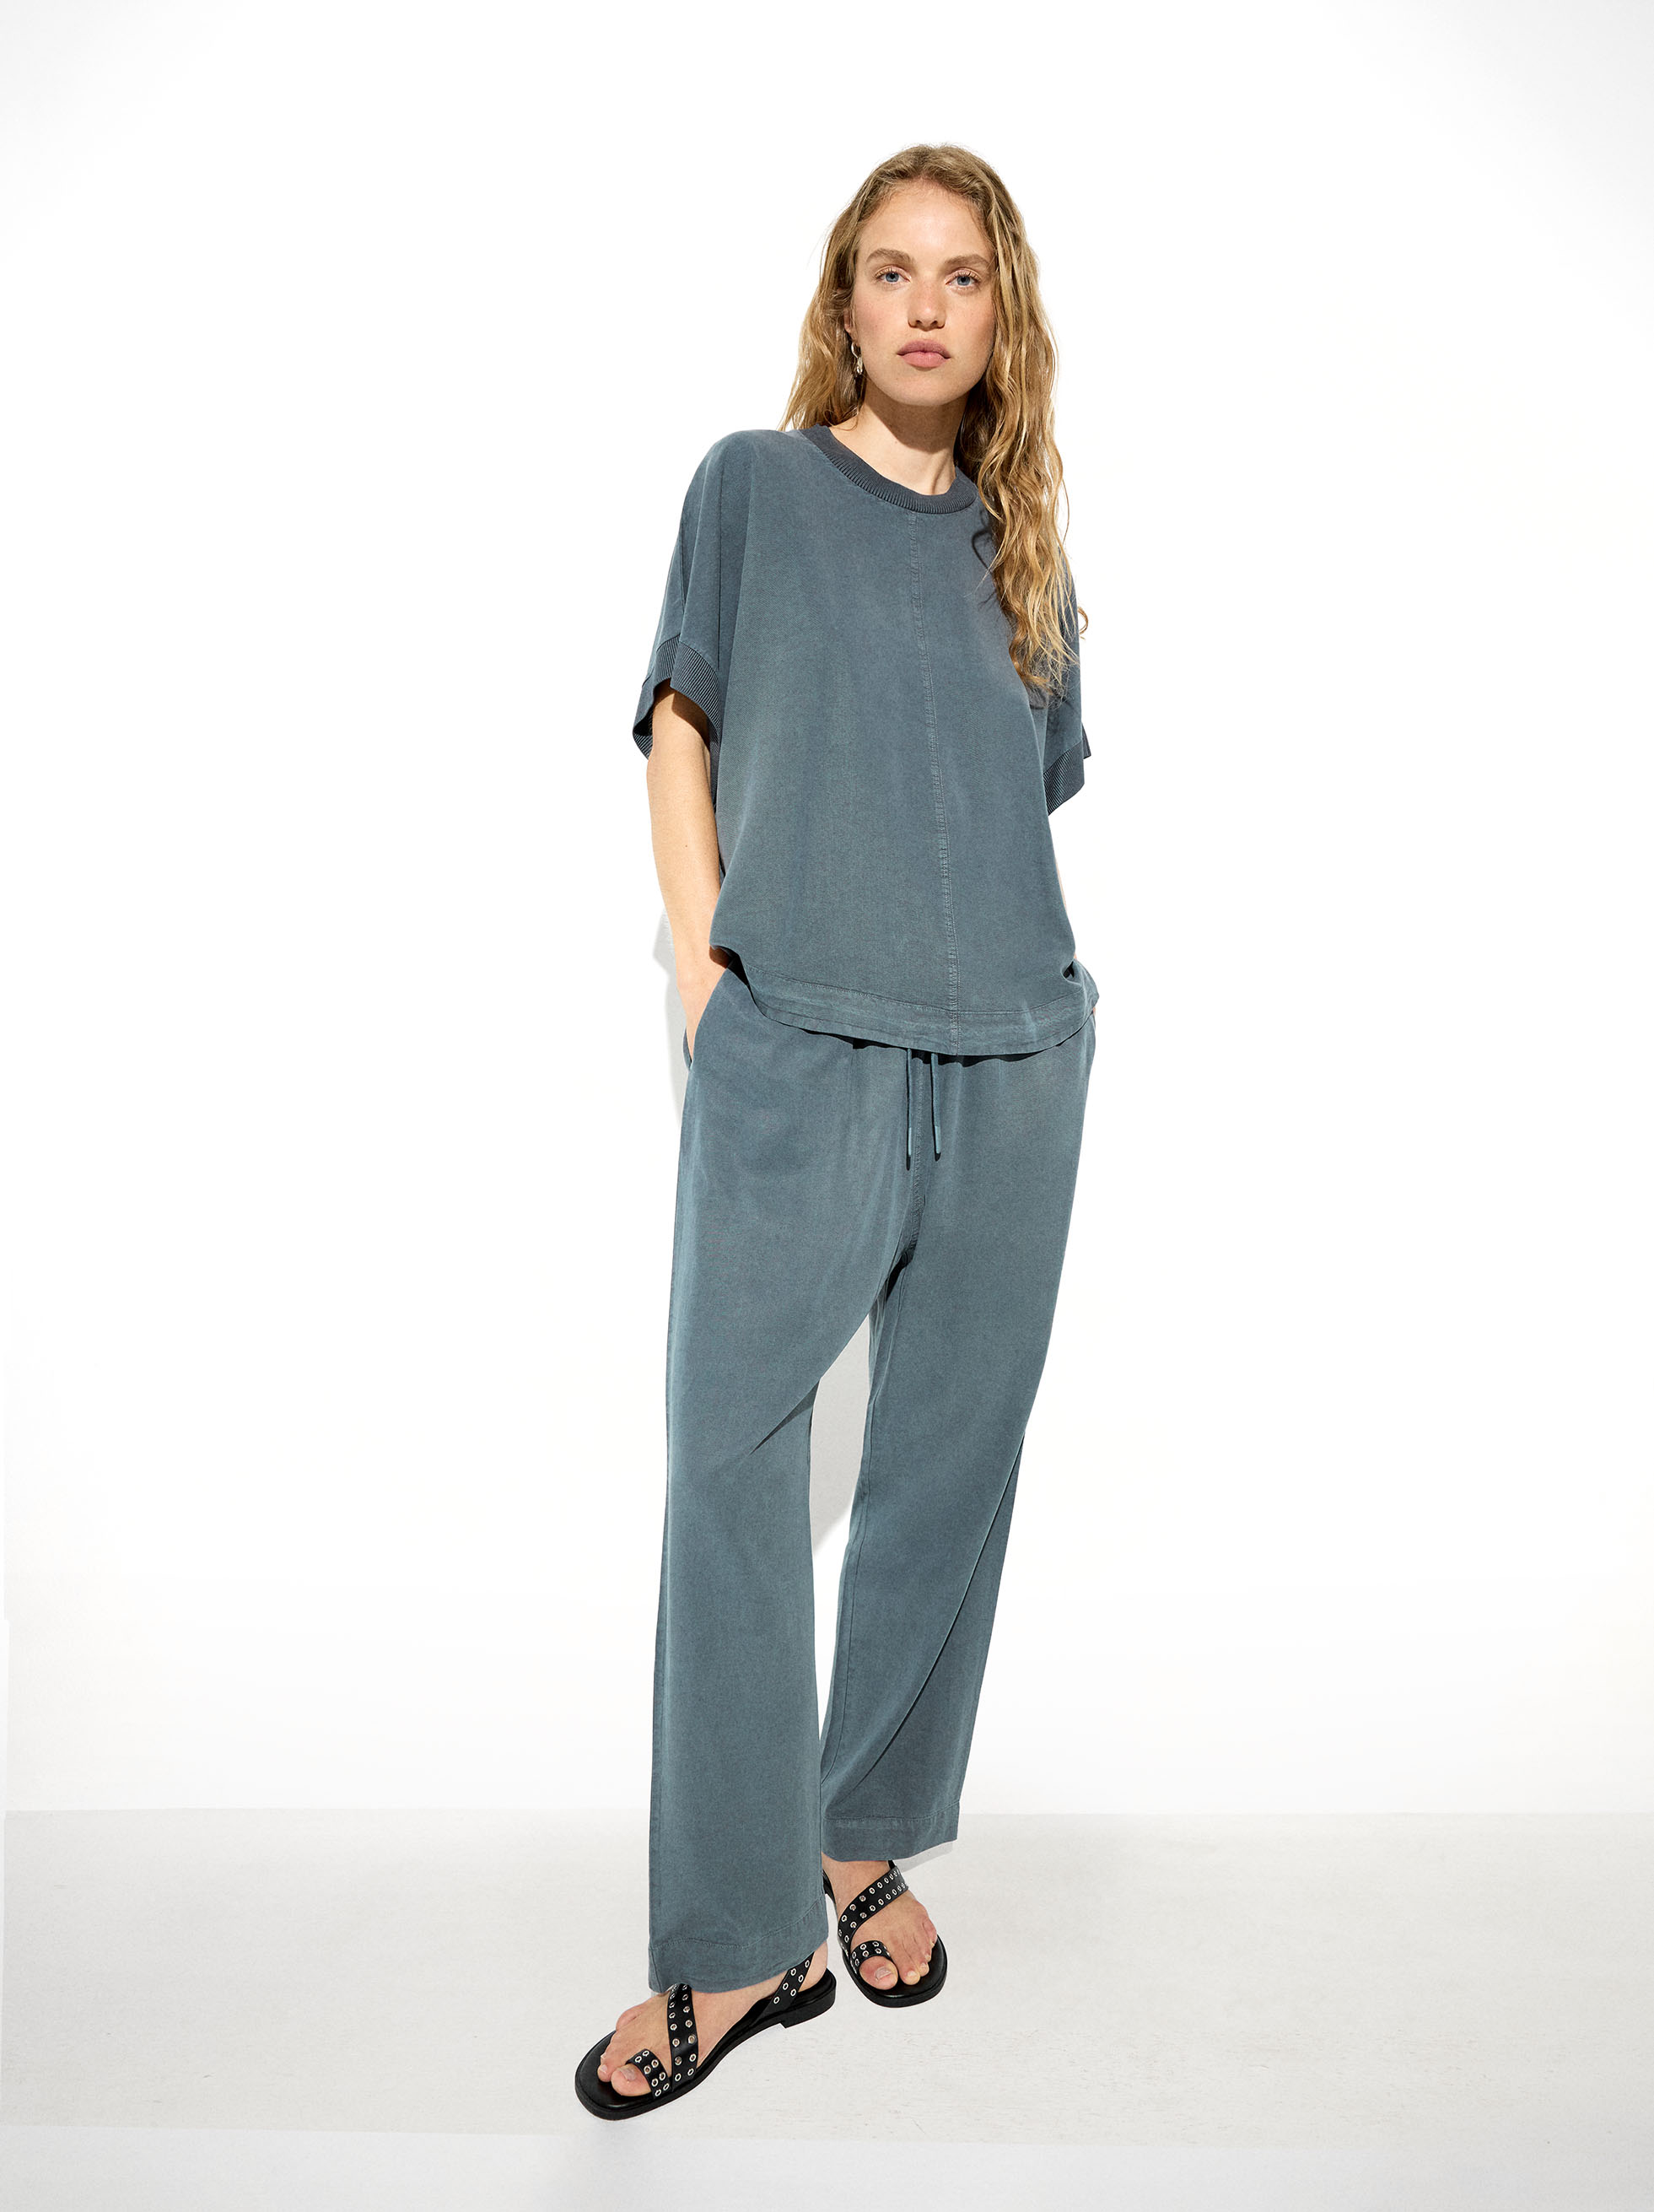 Adjustable Loose-Fitting Trousers Pants With Drawstring image number 0.0